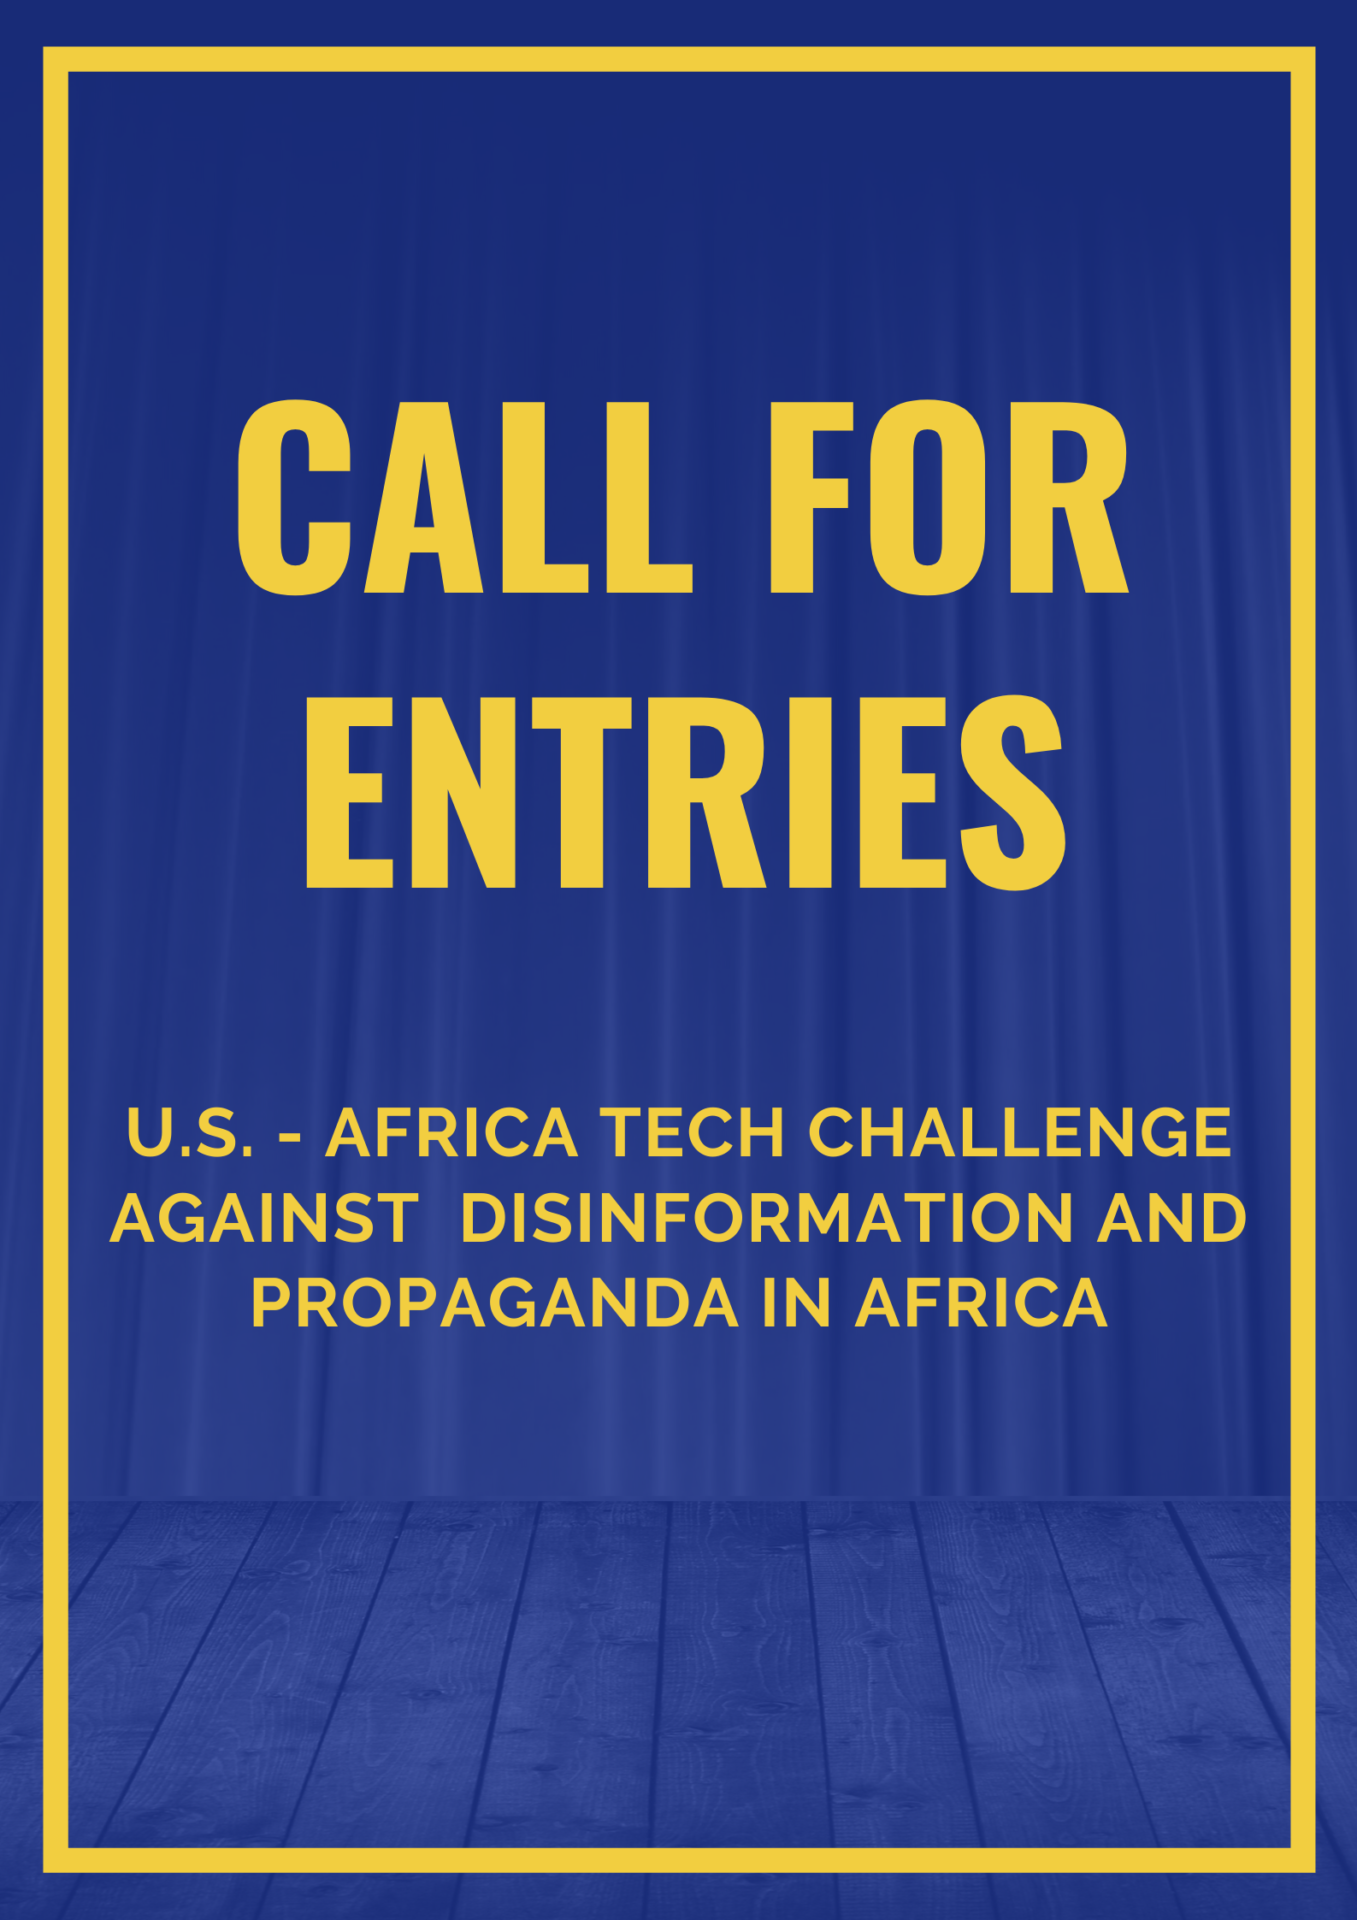 Call for Entries: African Tech Challenge Against Disinformation and Propaganda